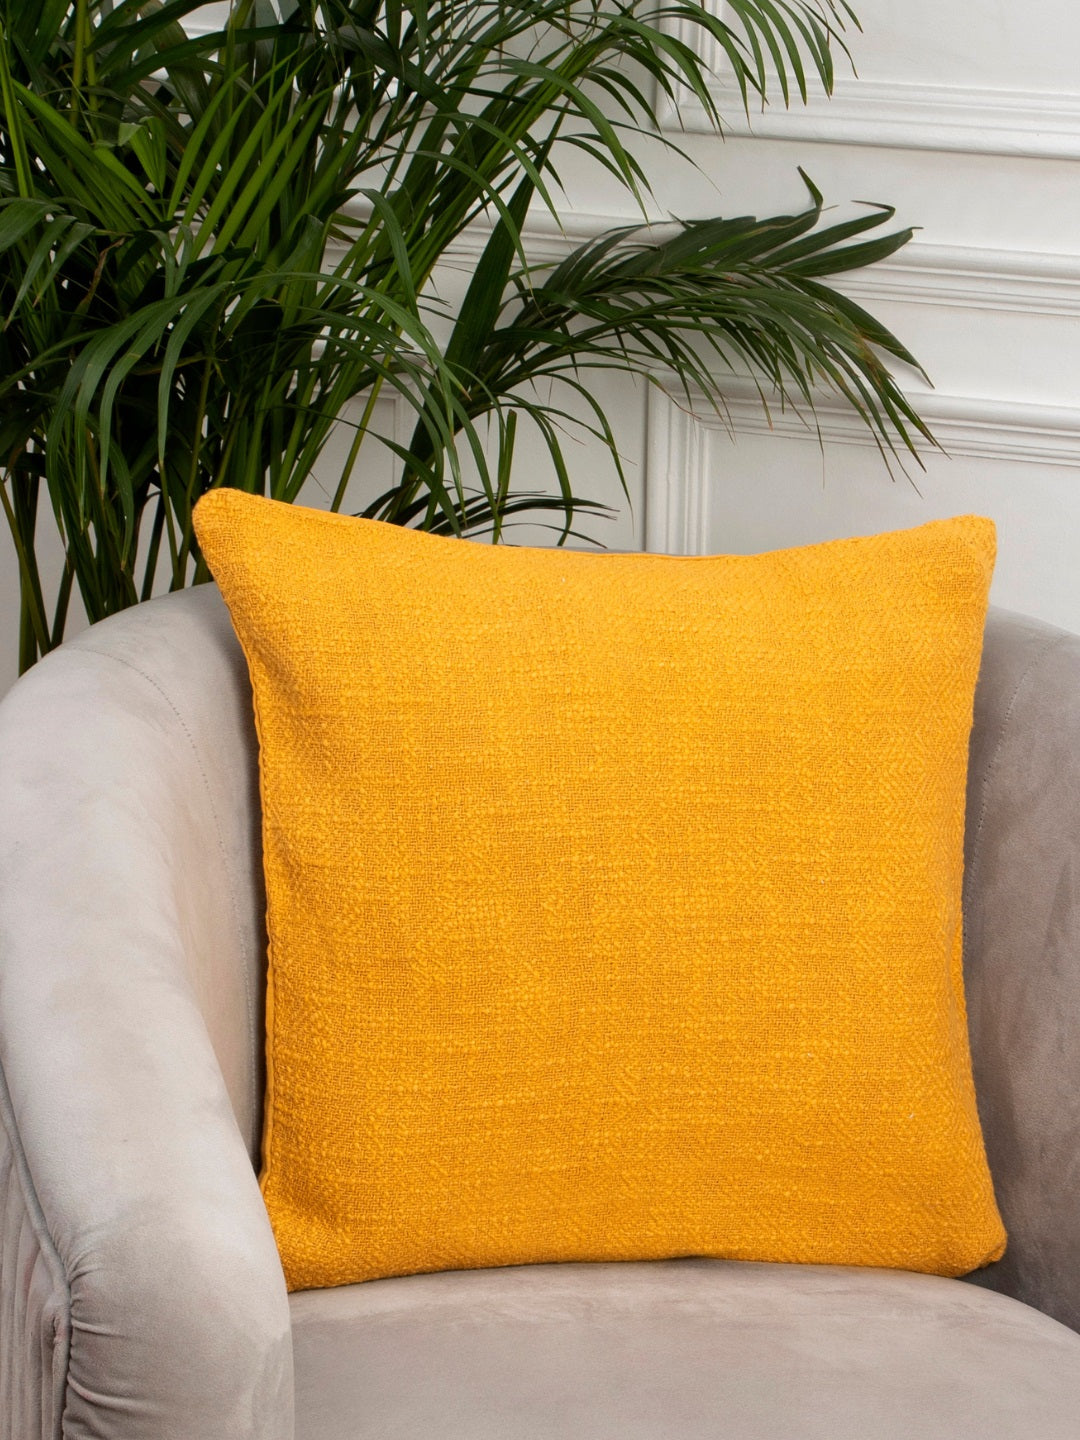 Mustard cotton tweed weave cushion cover